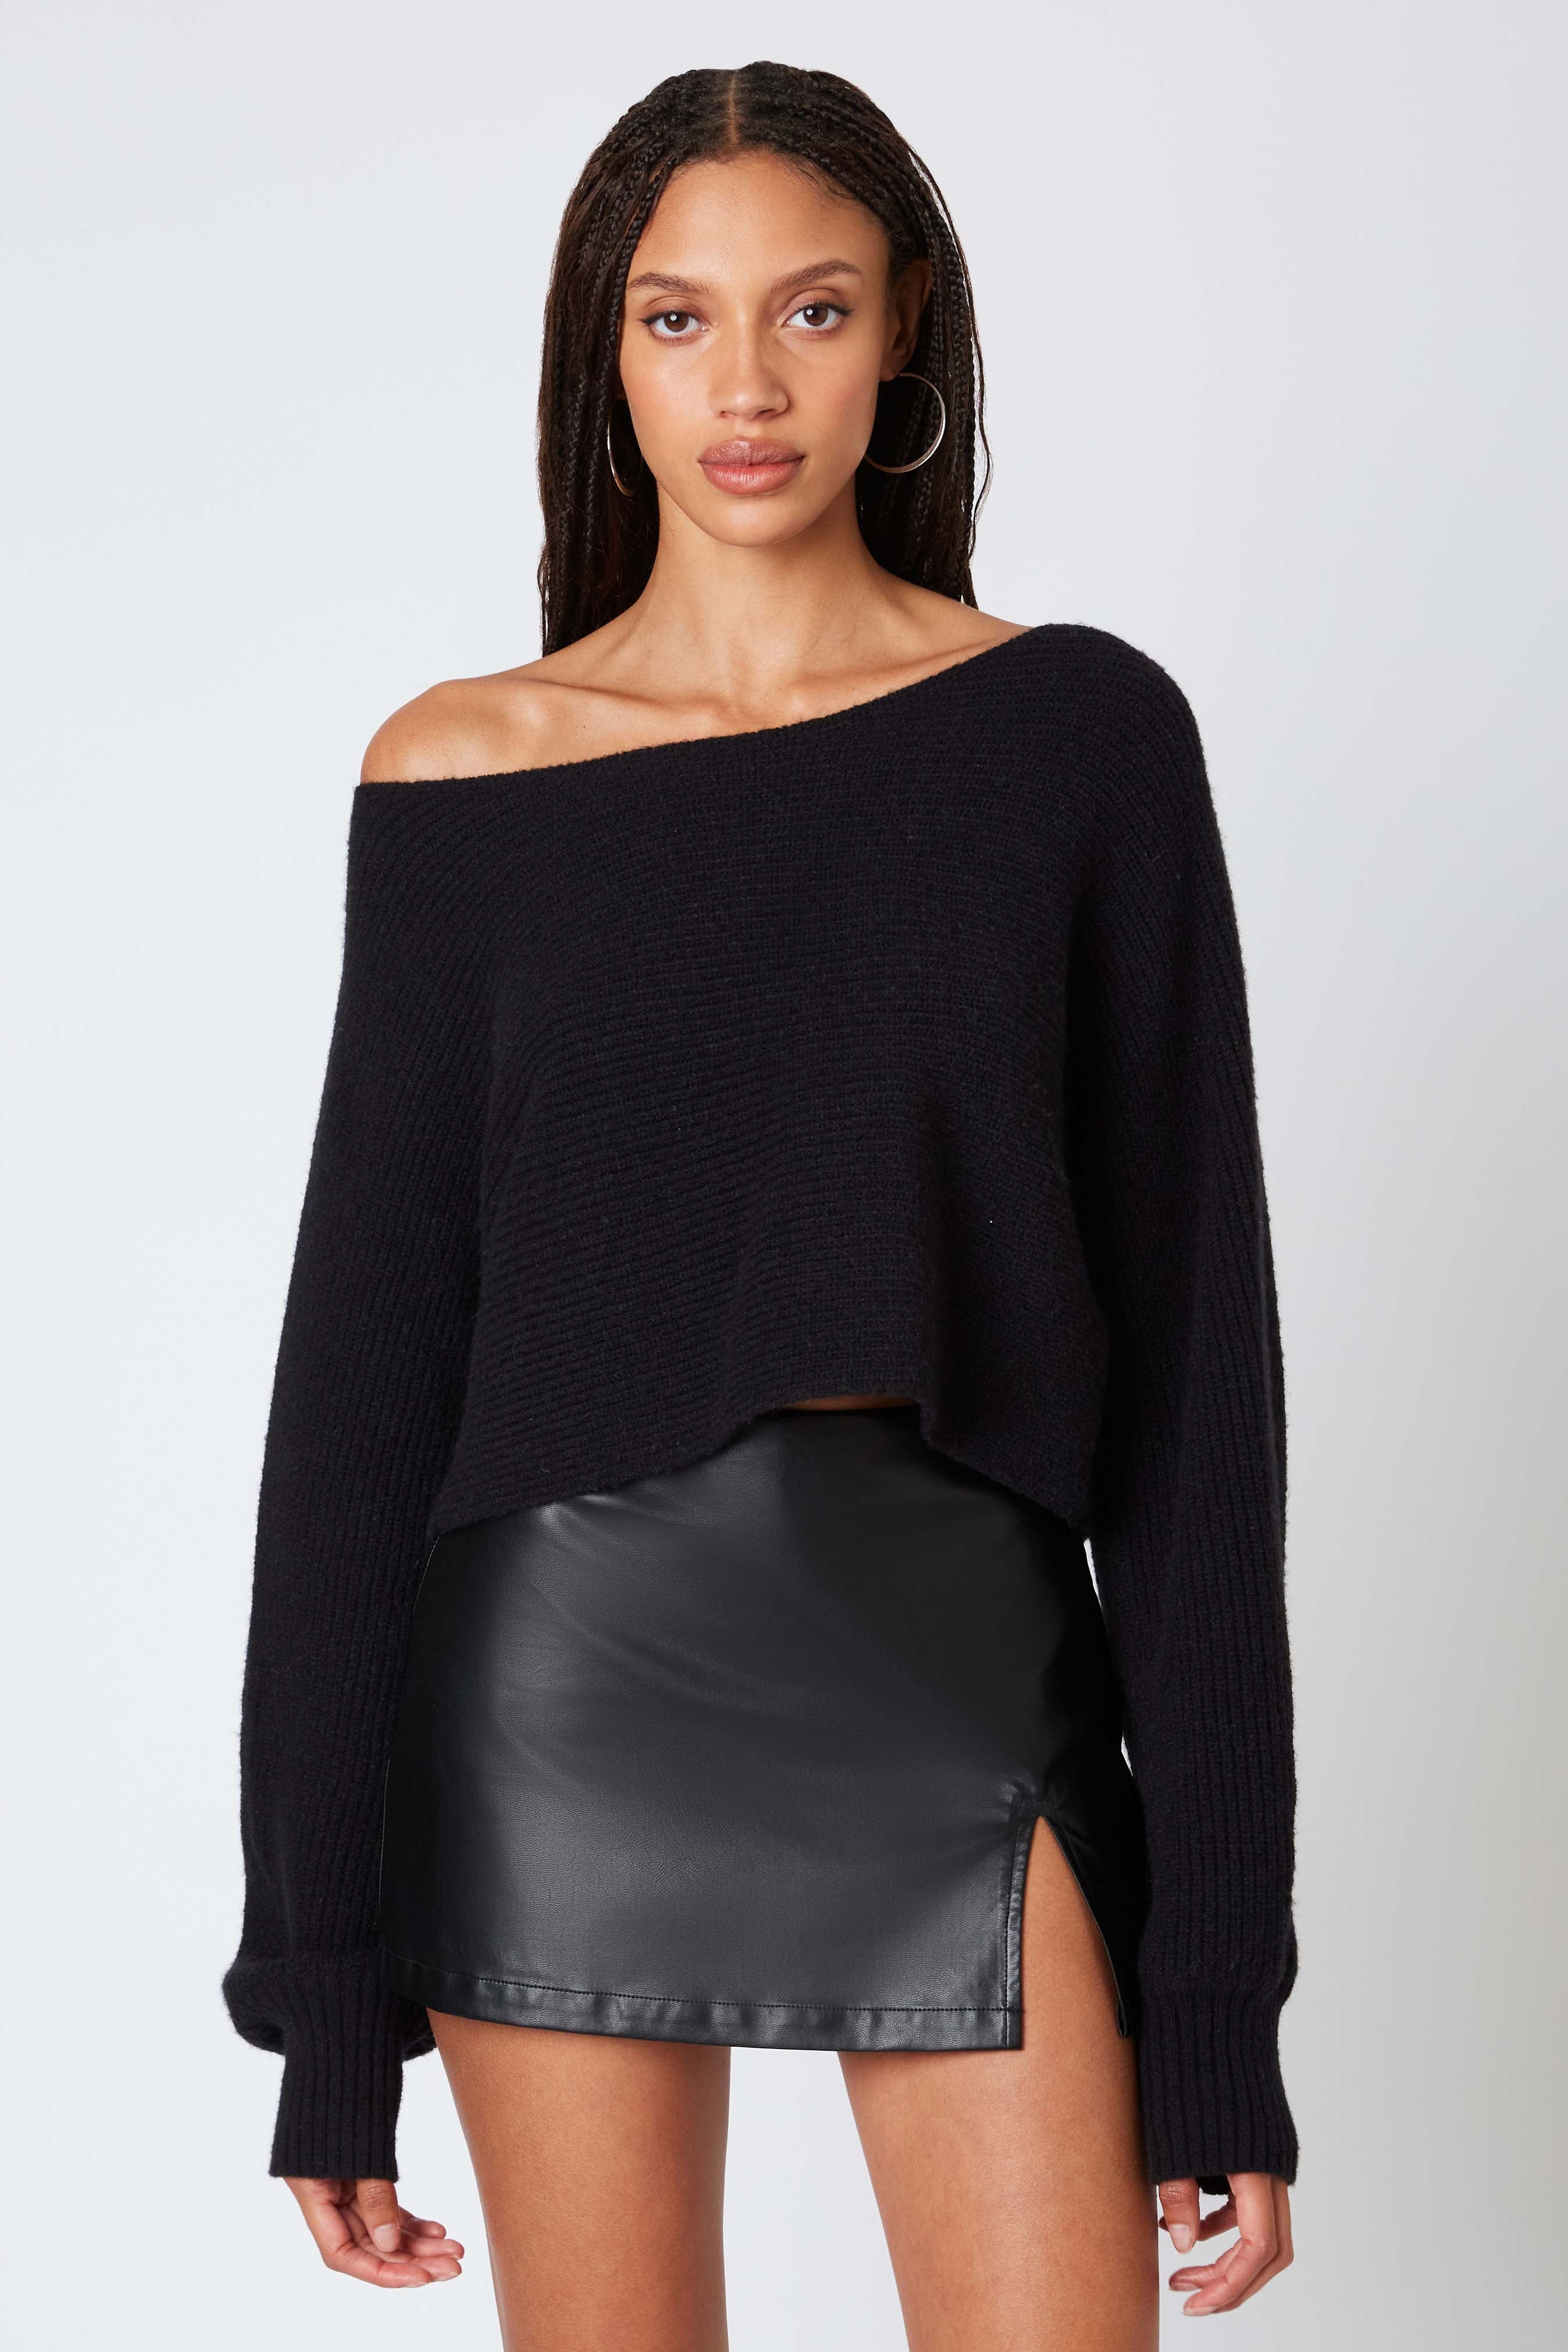 Off-Shoulder Knit Sweater in Black Front View